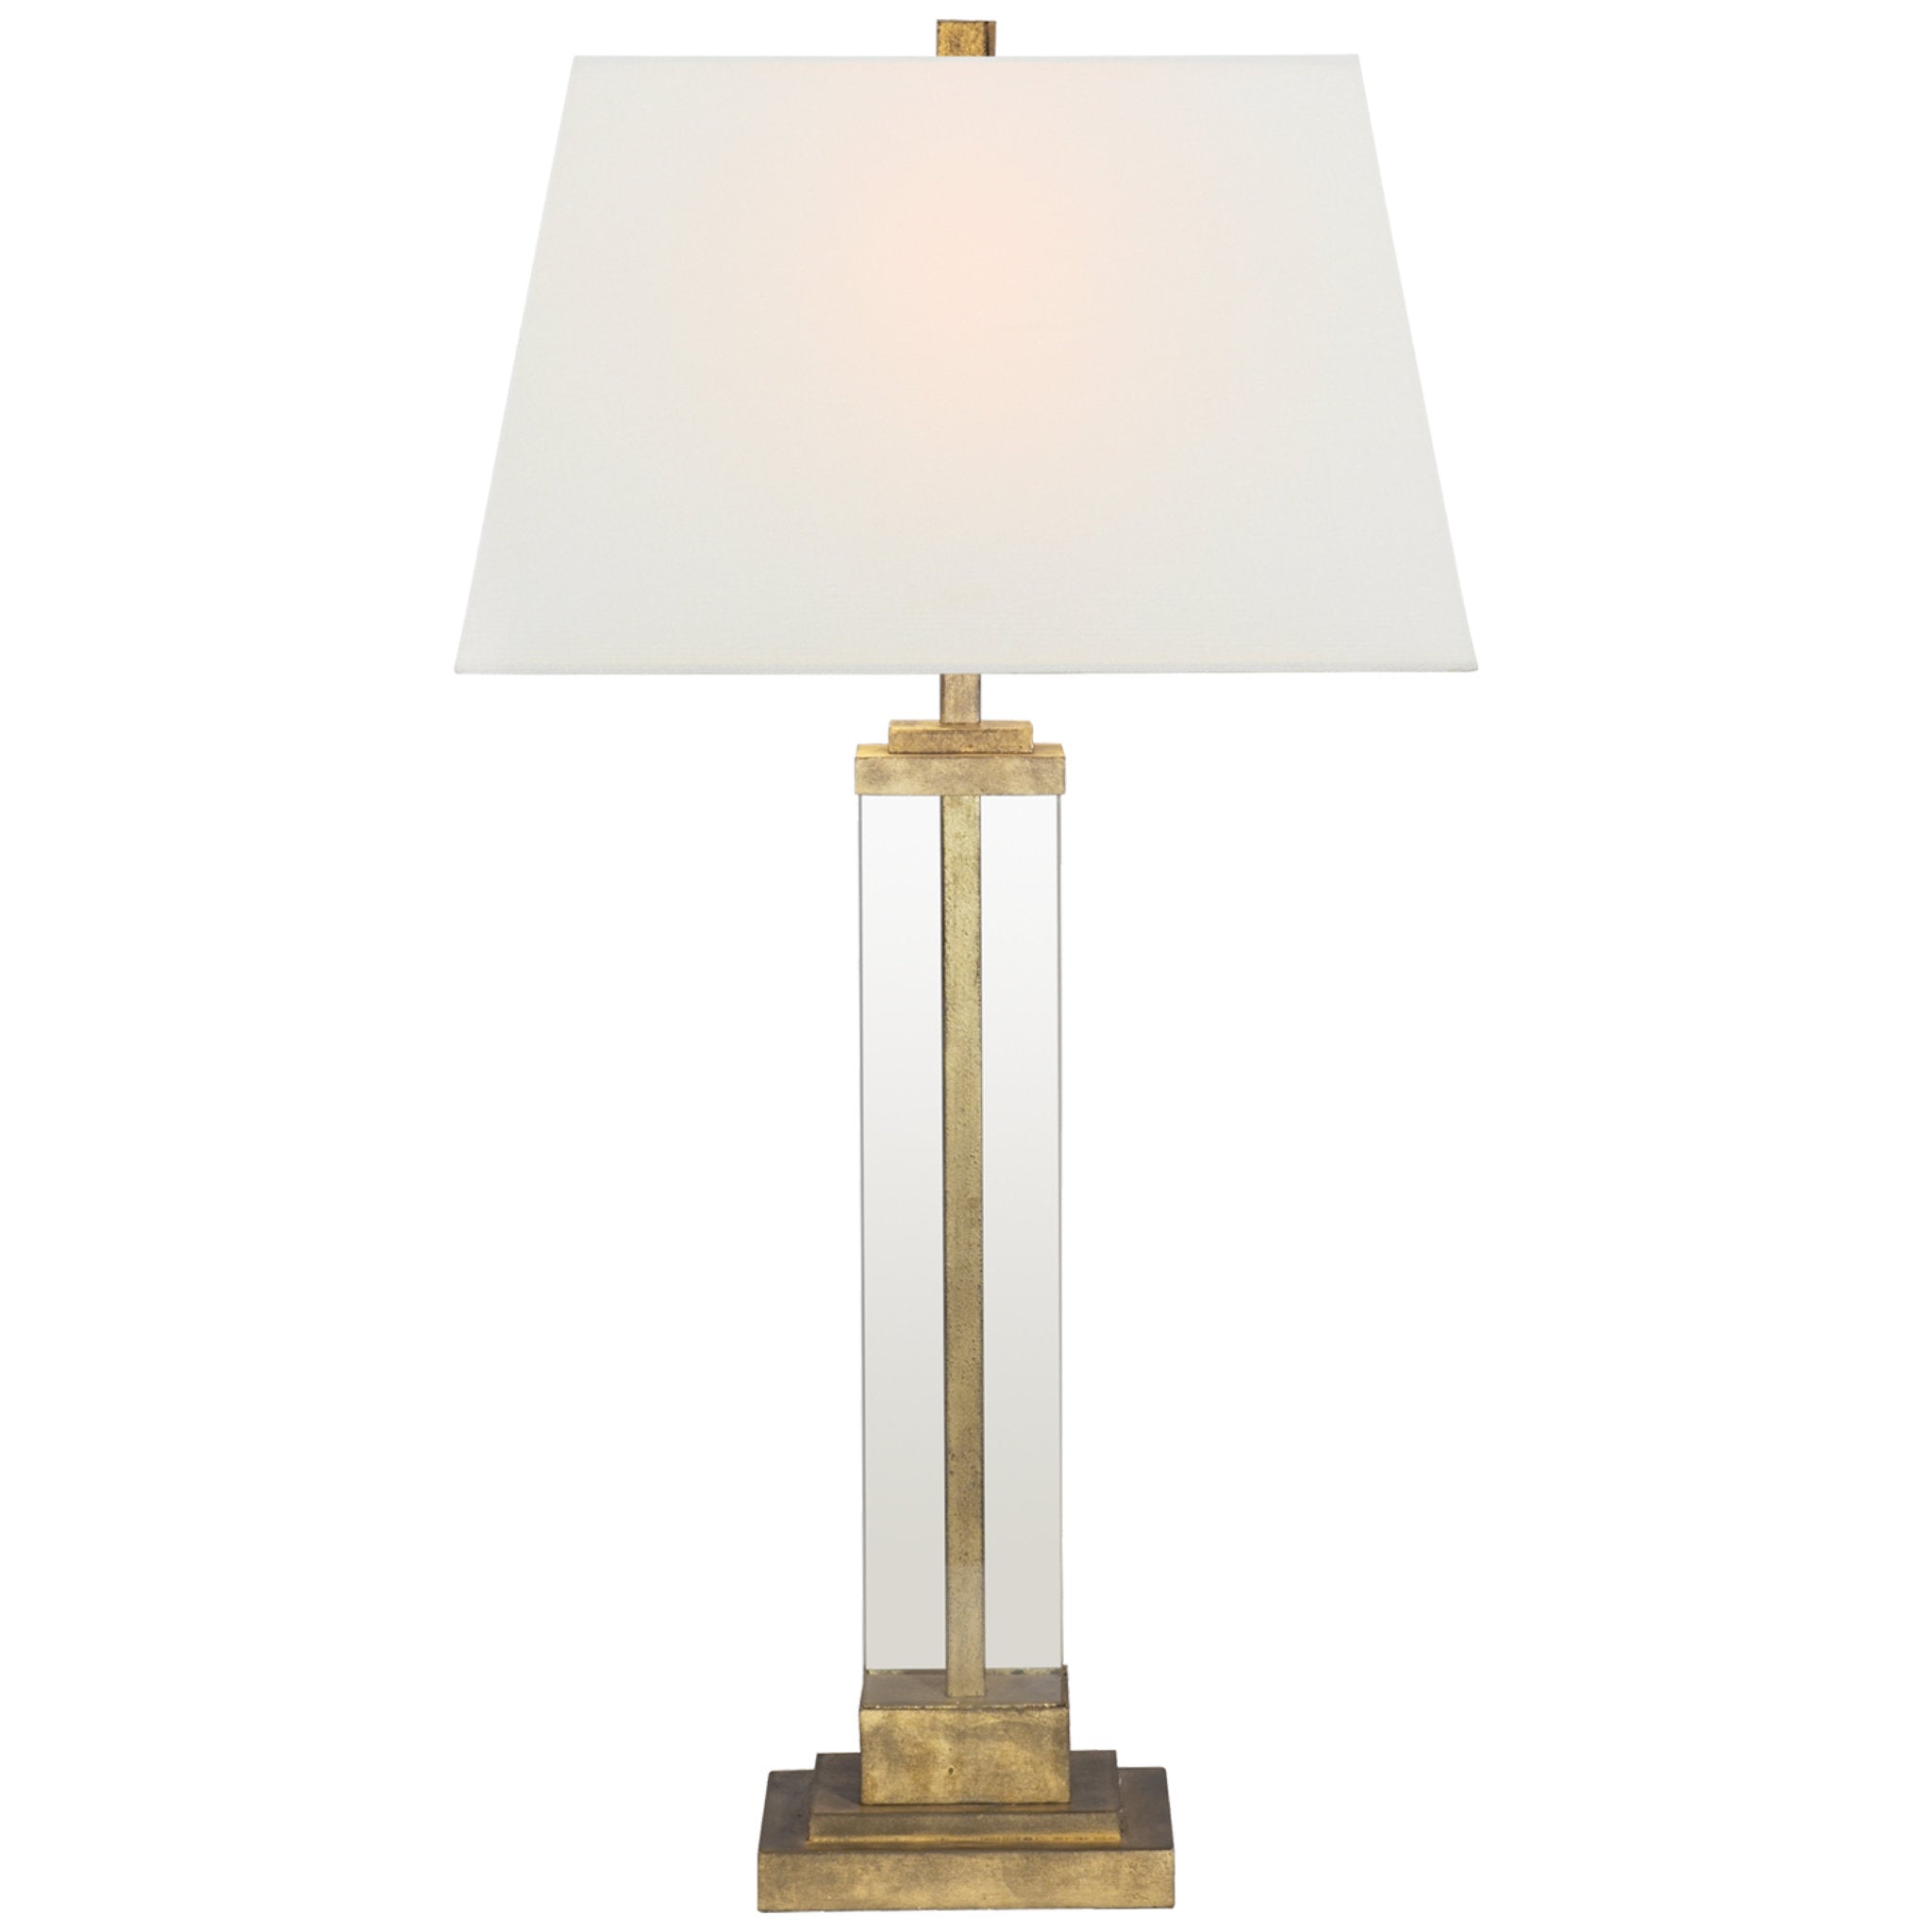 Visual Comfort Wright Table Lamp in Gilded Iron and Glass with Linen Shade